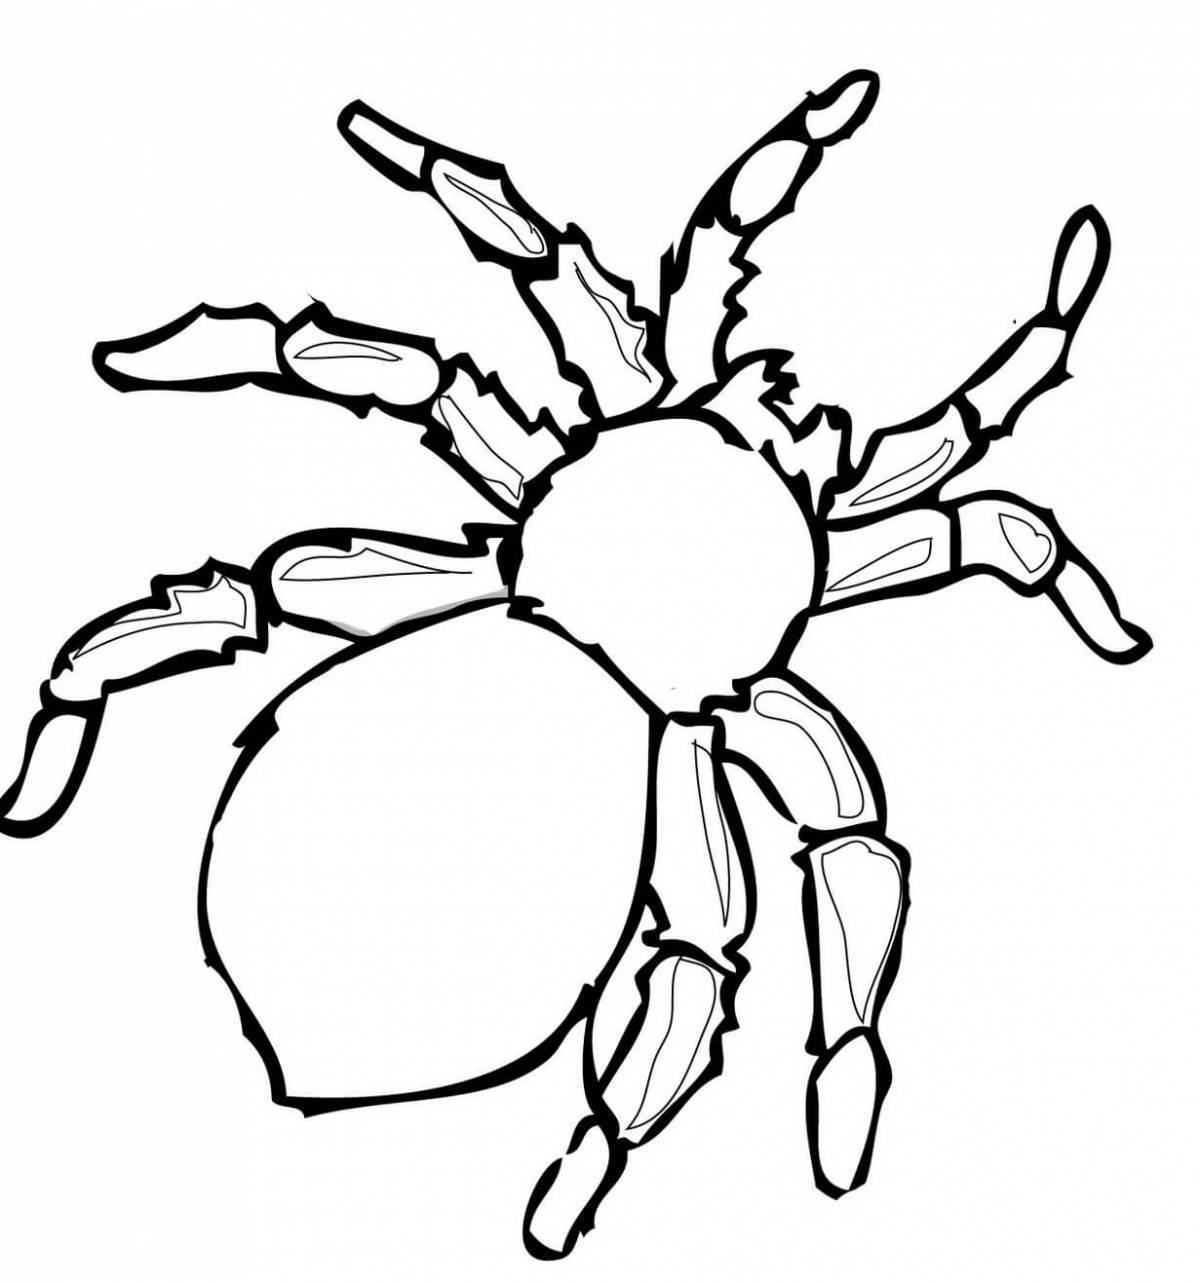 Outstanding spider coloring page for kids